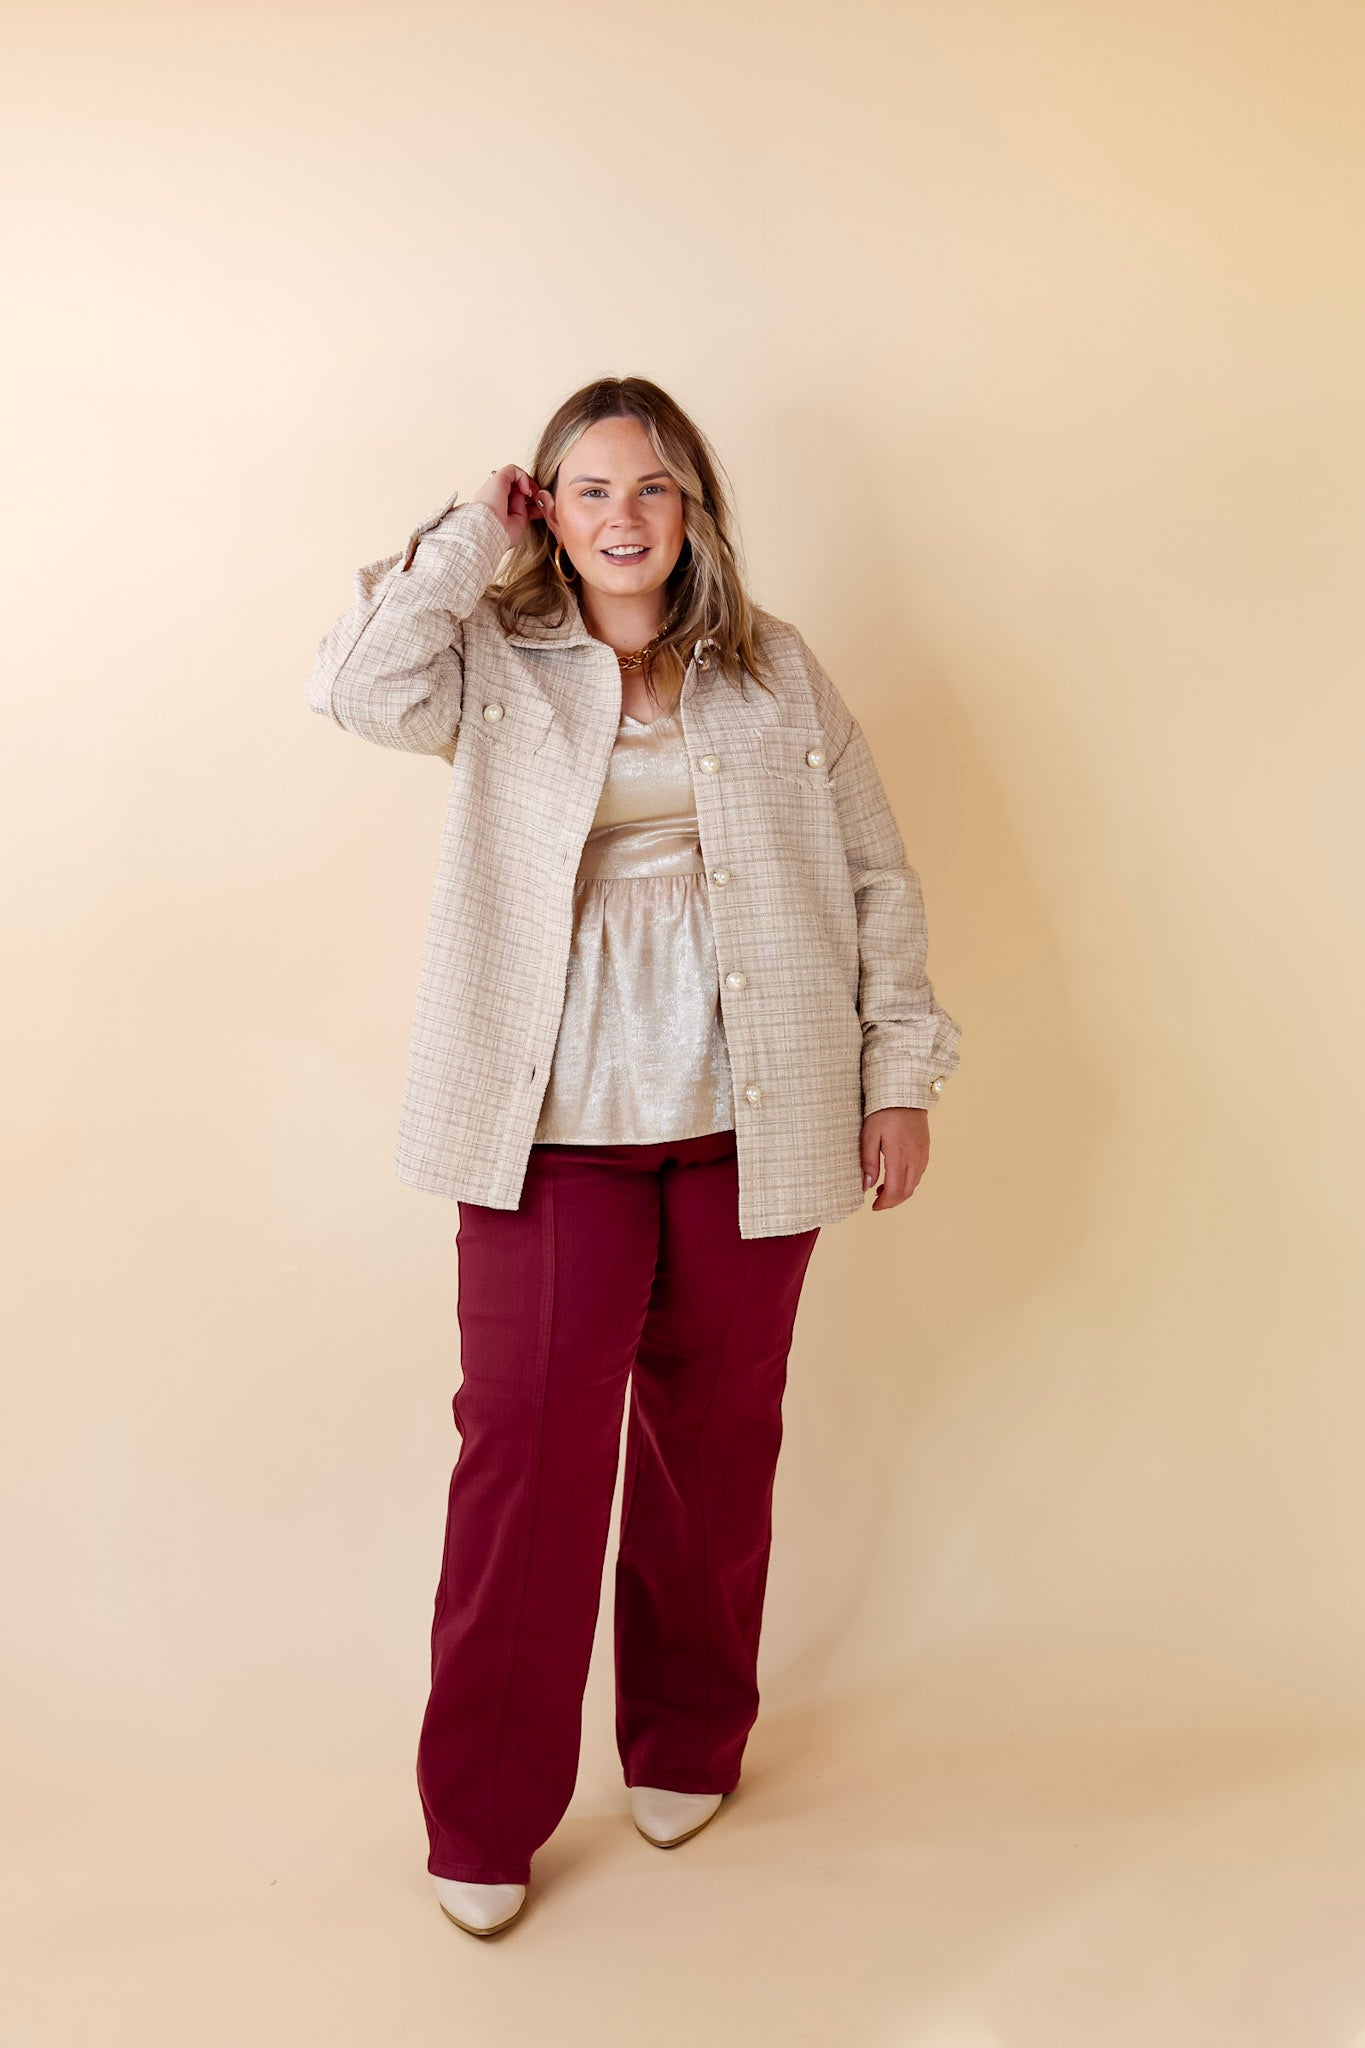 Brooklyn Buzz Pearl Button Up Tweed Shacket in Champagne - Giddy Up Glamour Boutique